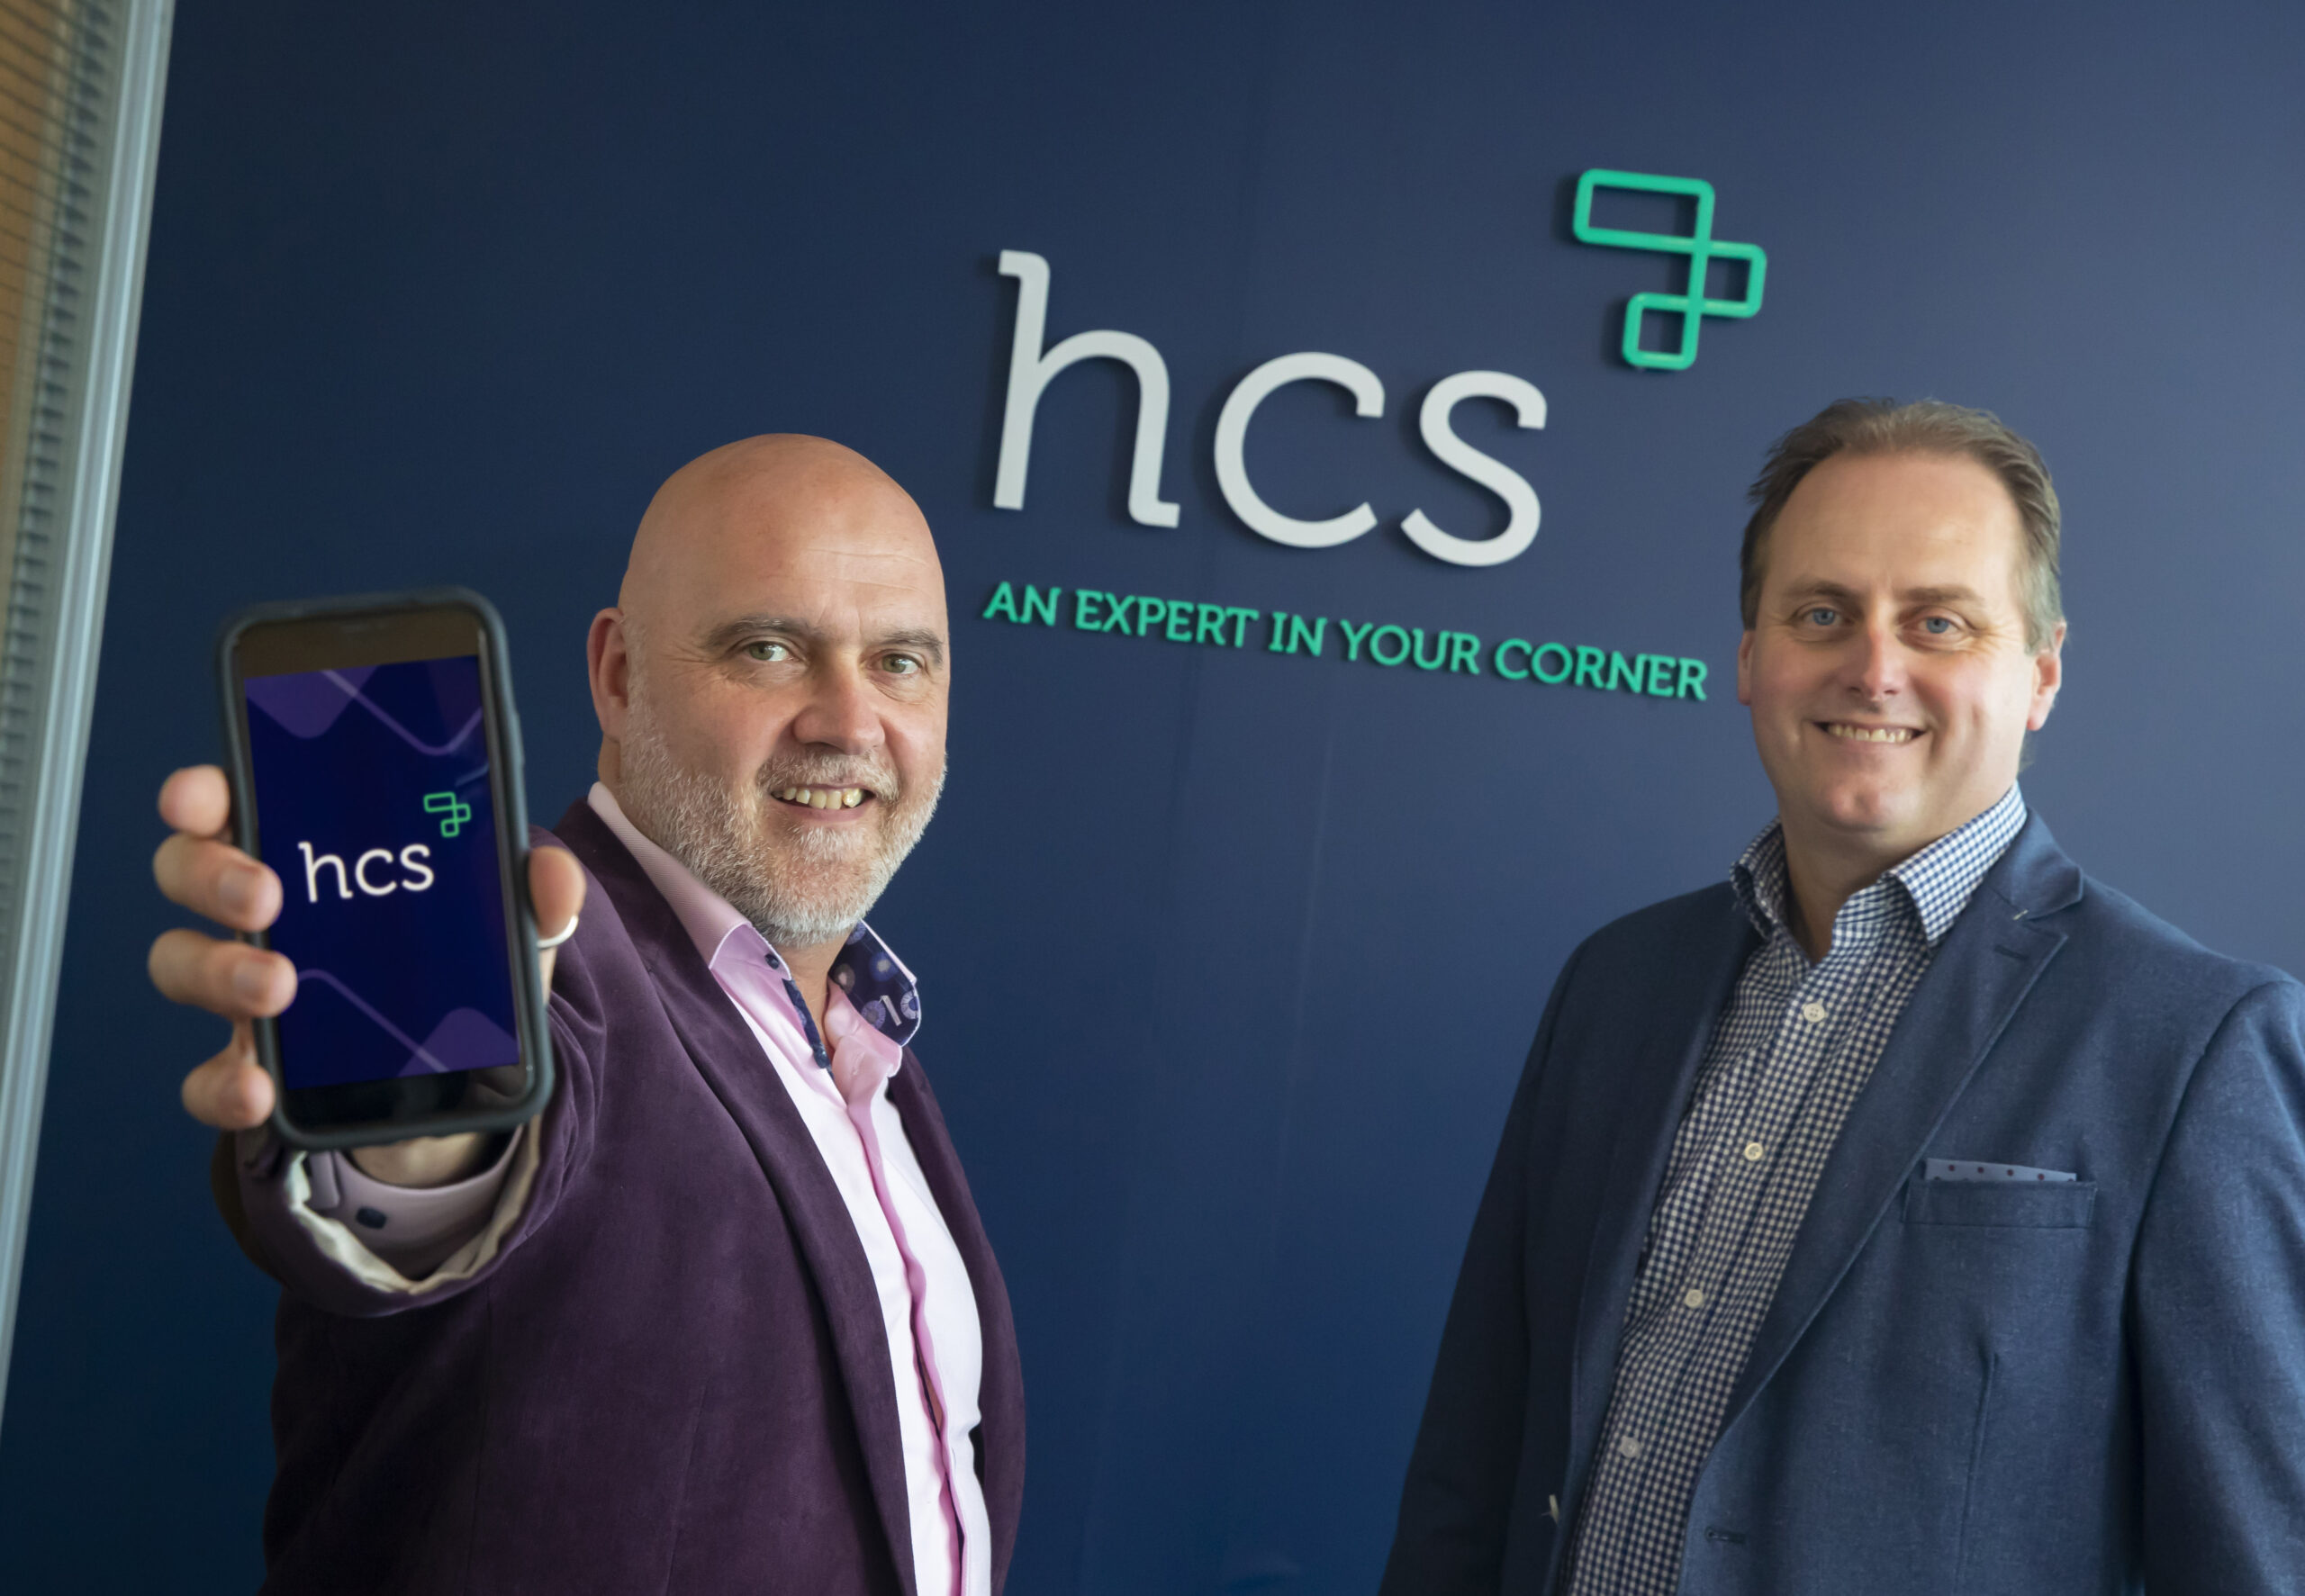 Colin Byrne Creative Director of TOTEM and Neil Phelan CEO of HCS